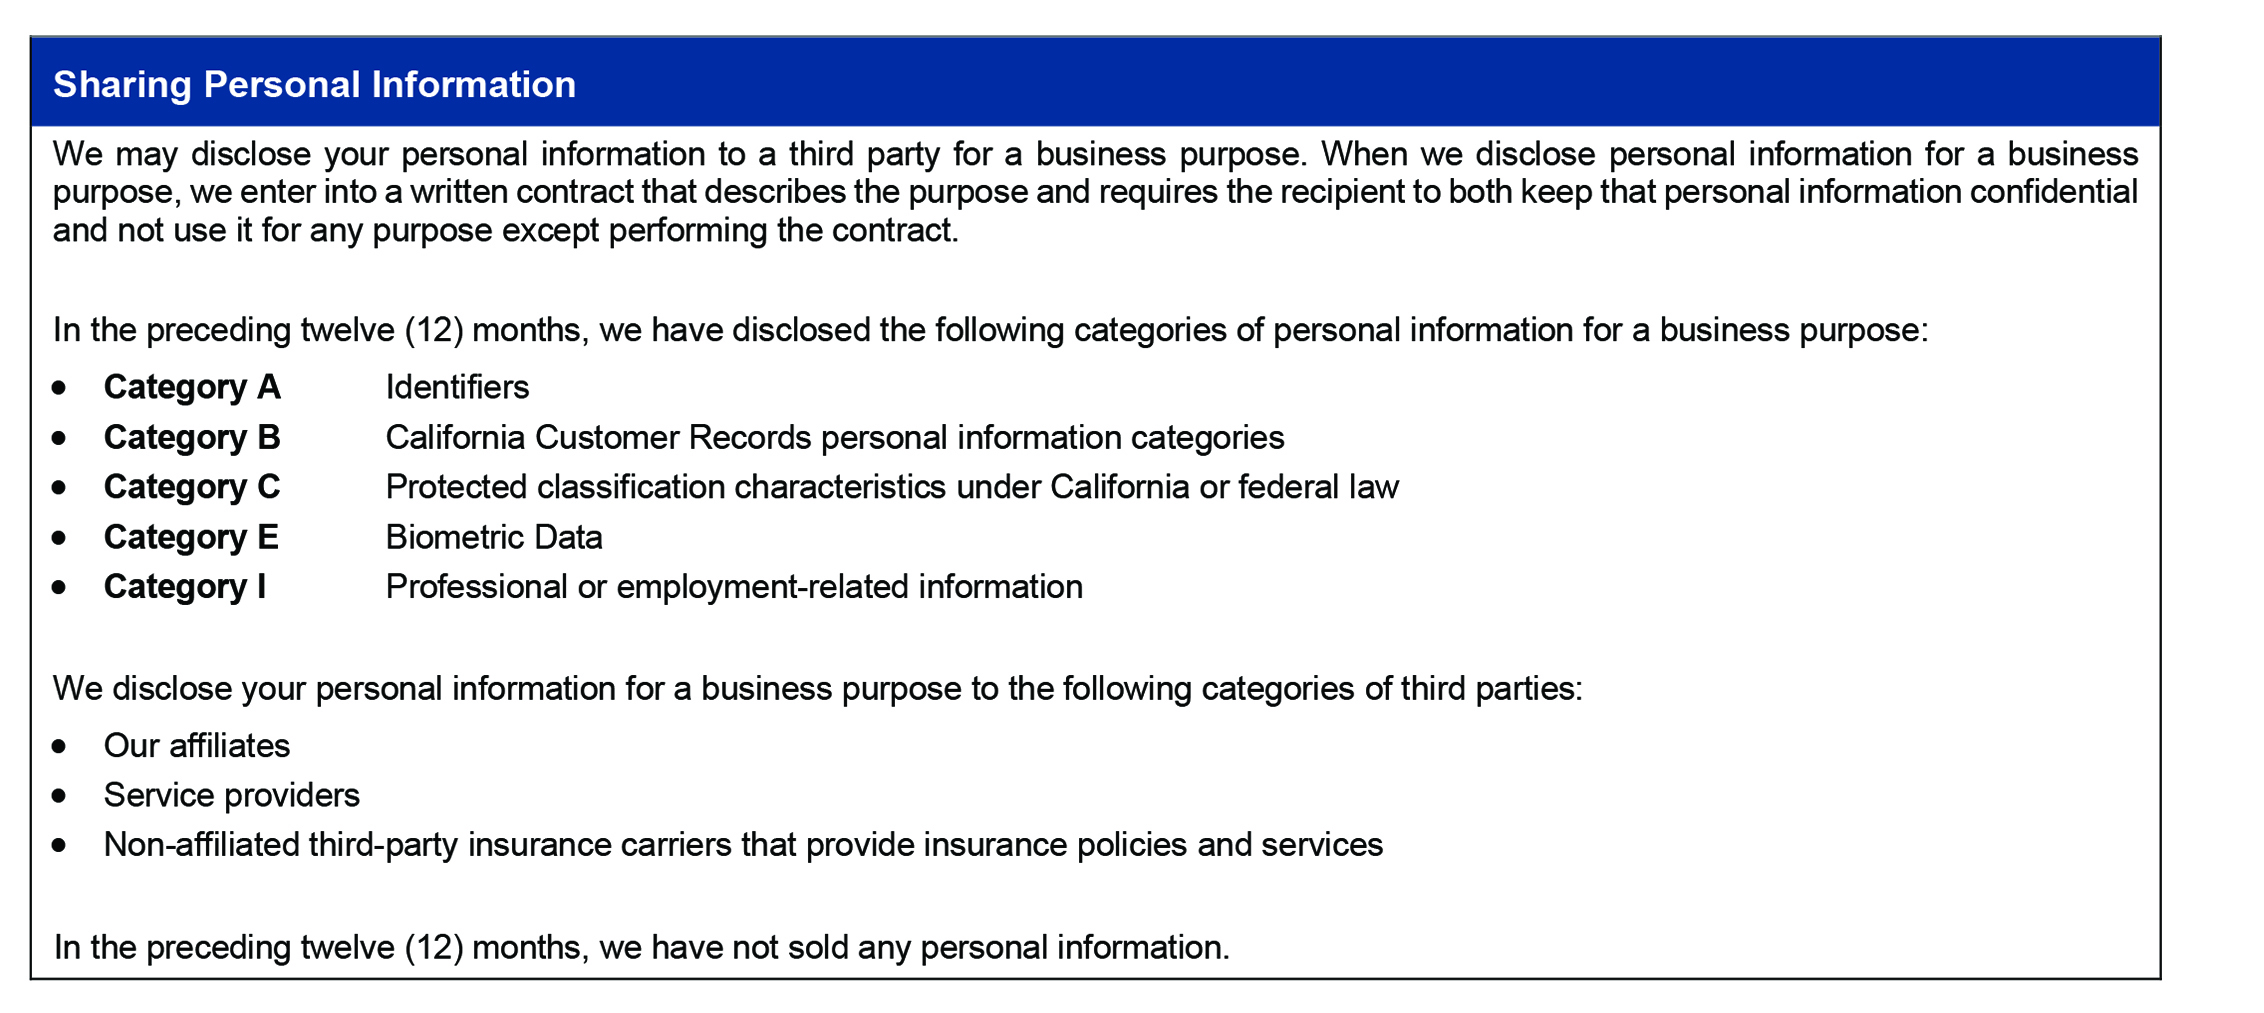 Newport California Consumer Privacy Act image five: Sharing Personal Information